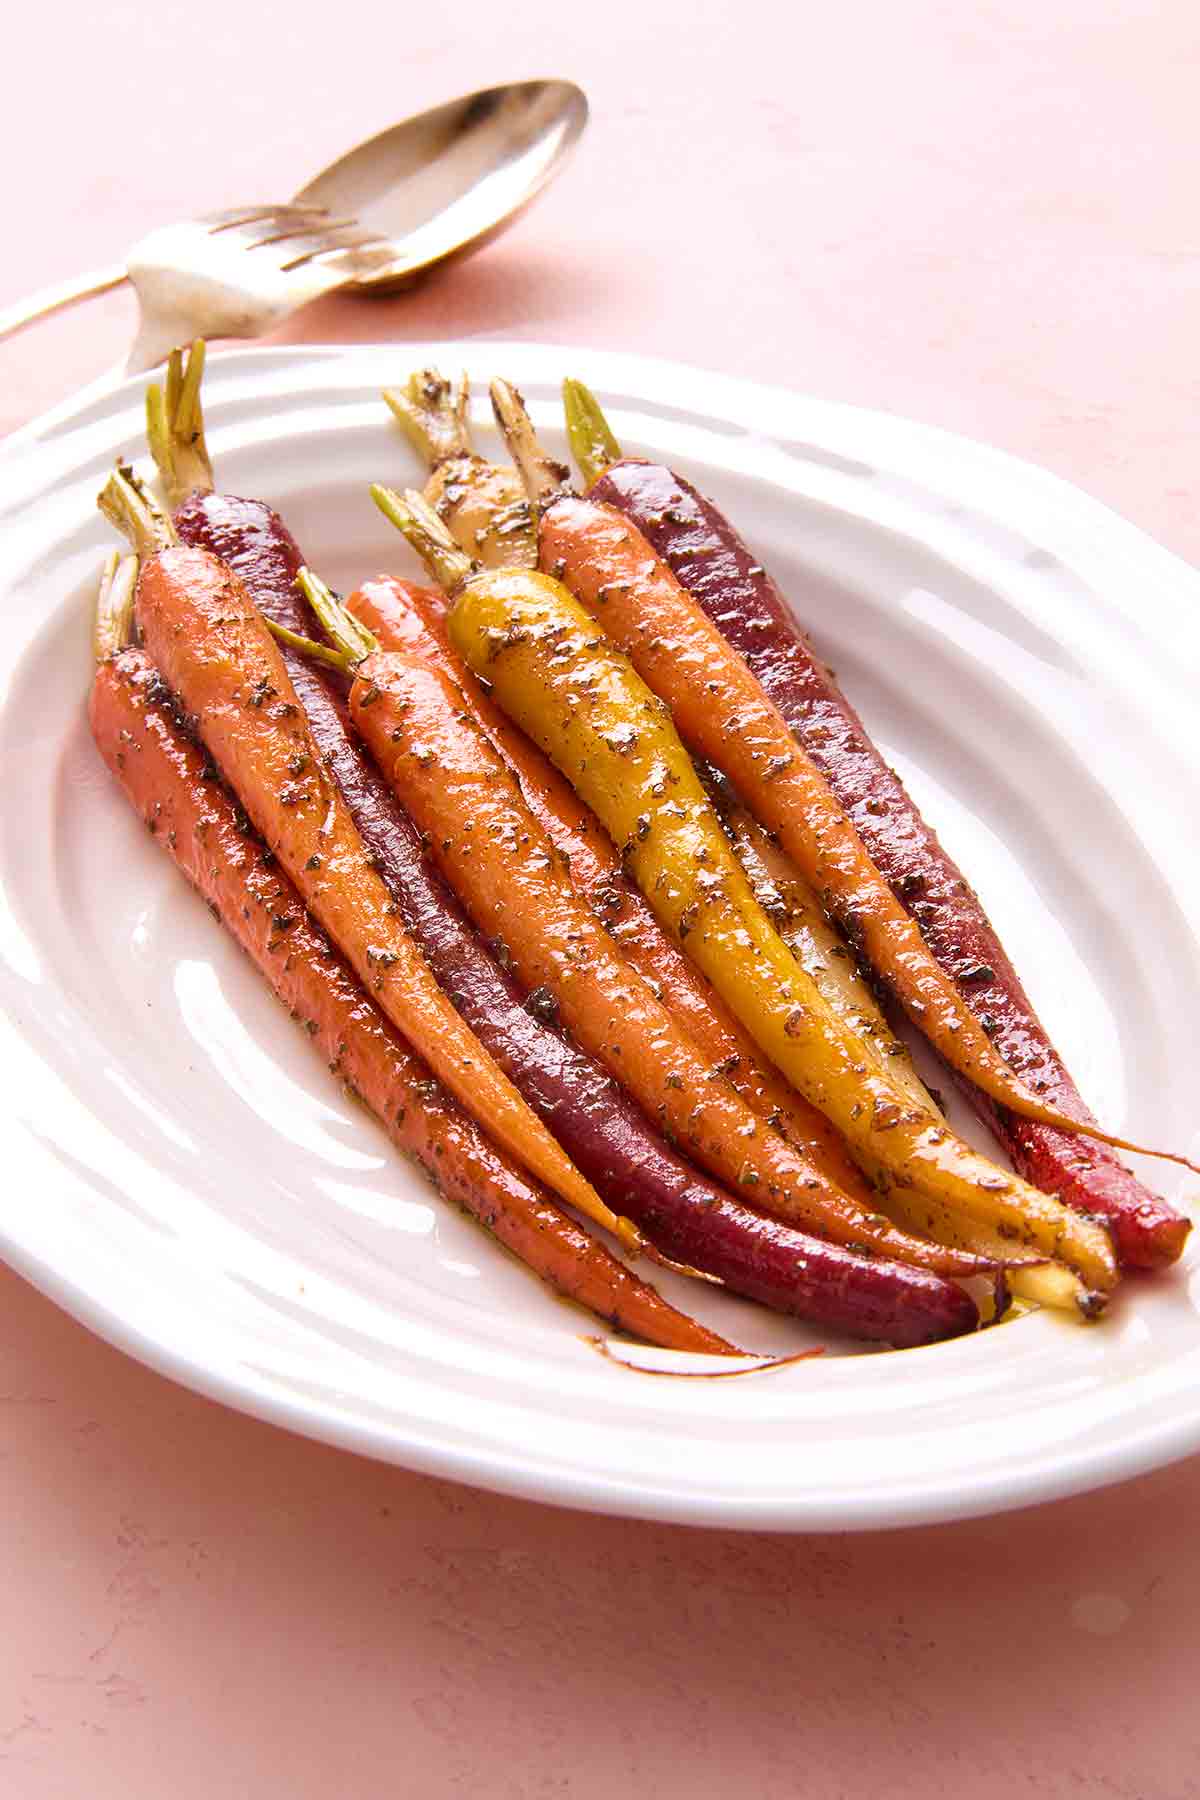 Nine colorful braised carrots on a white platter.